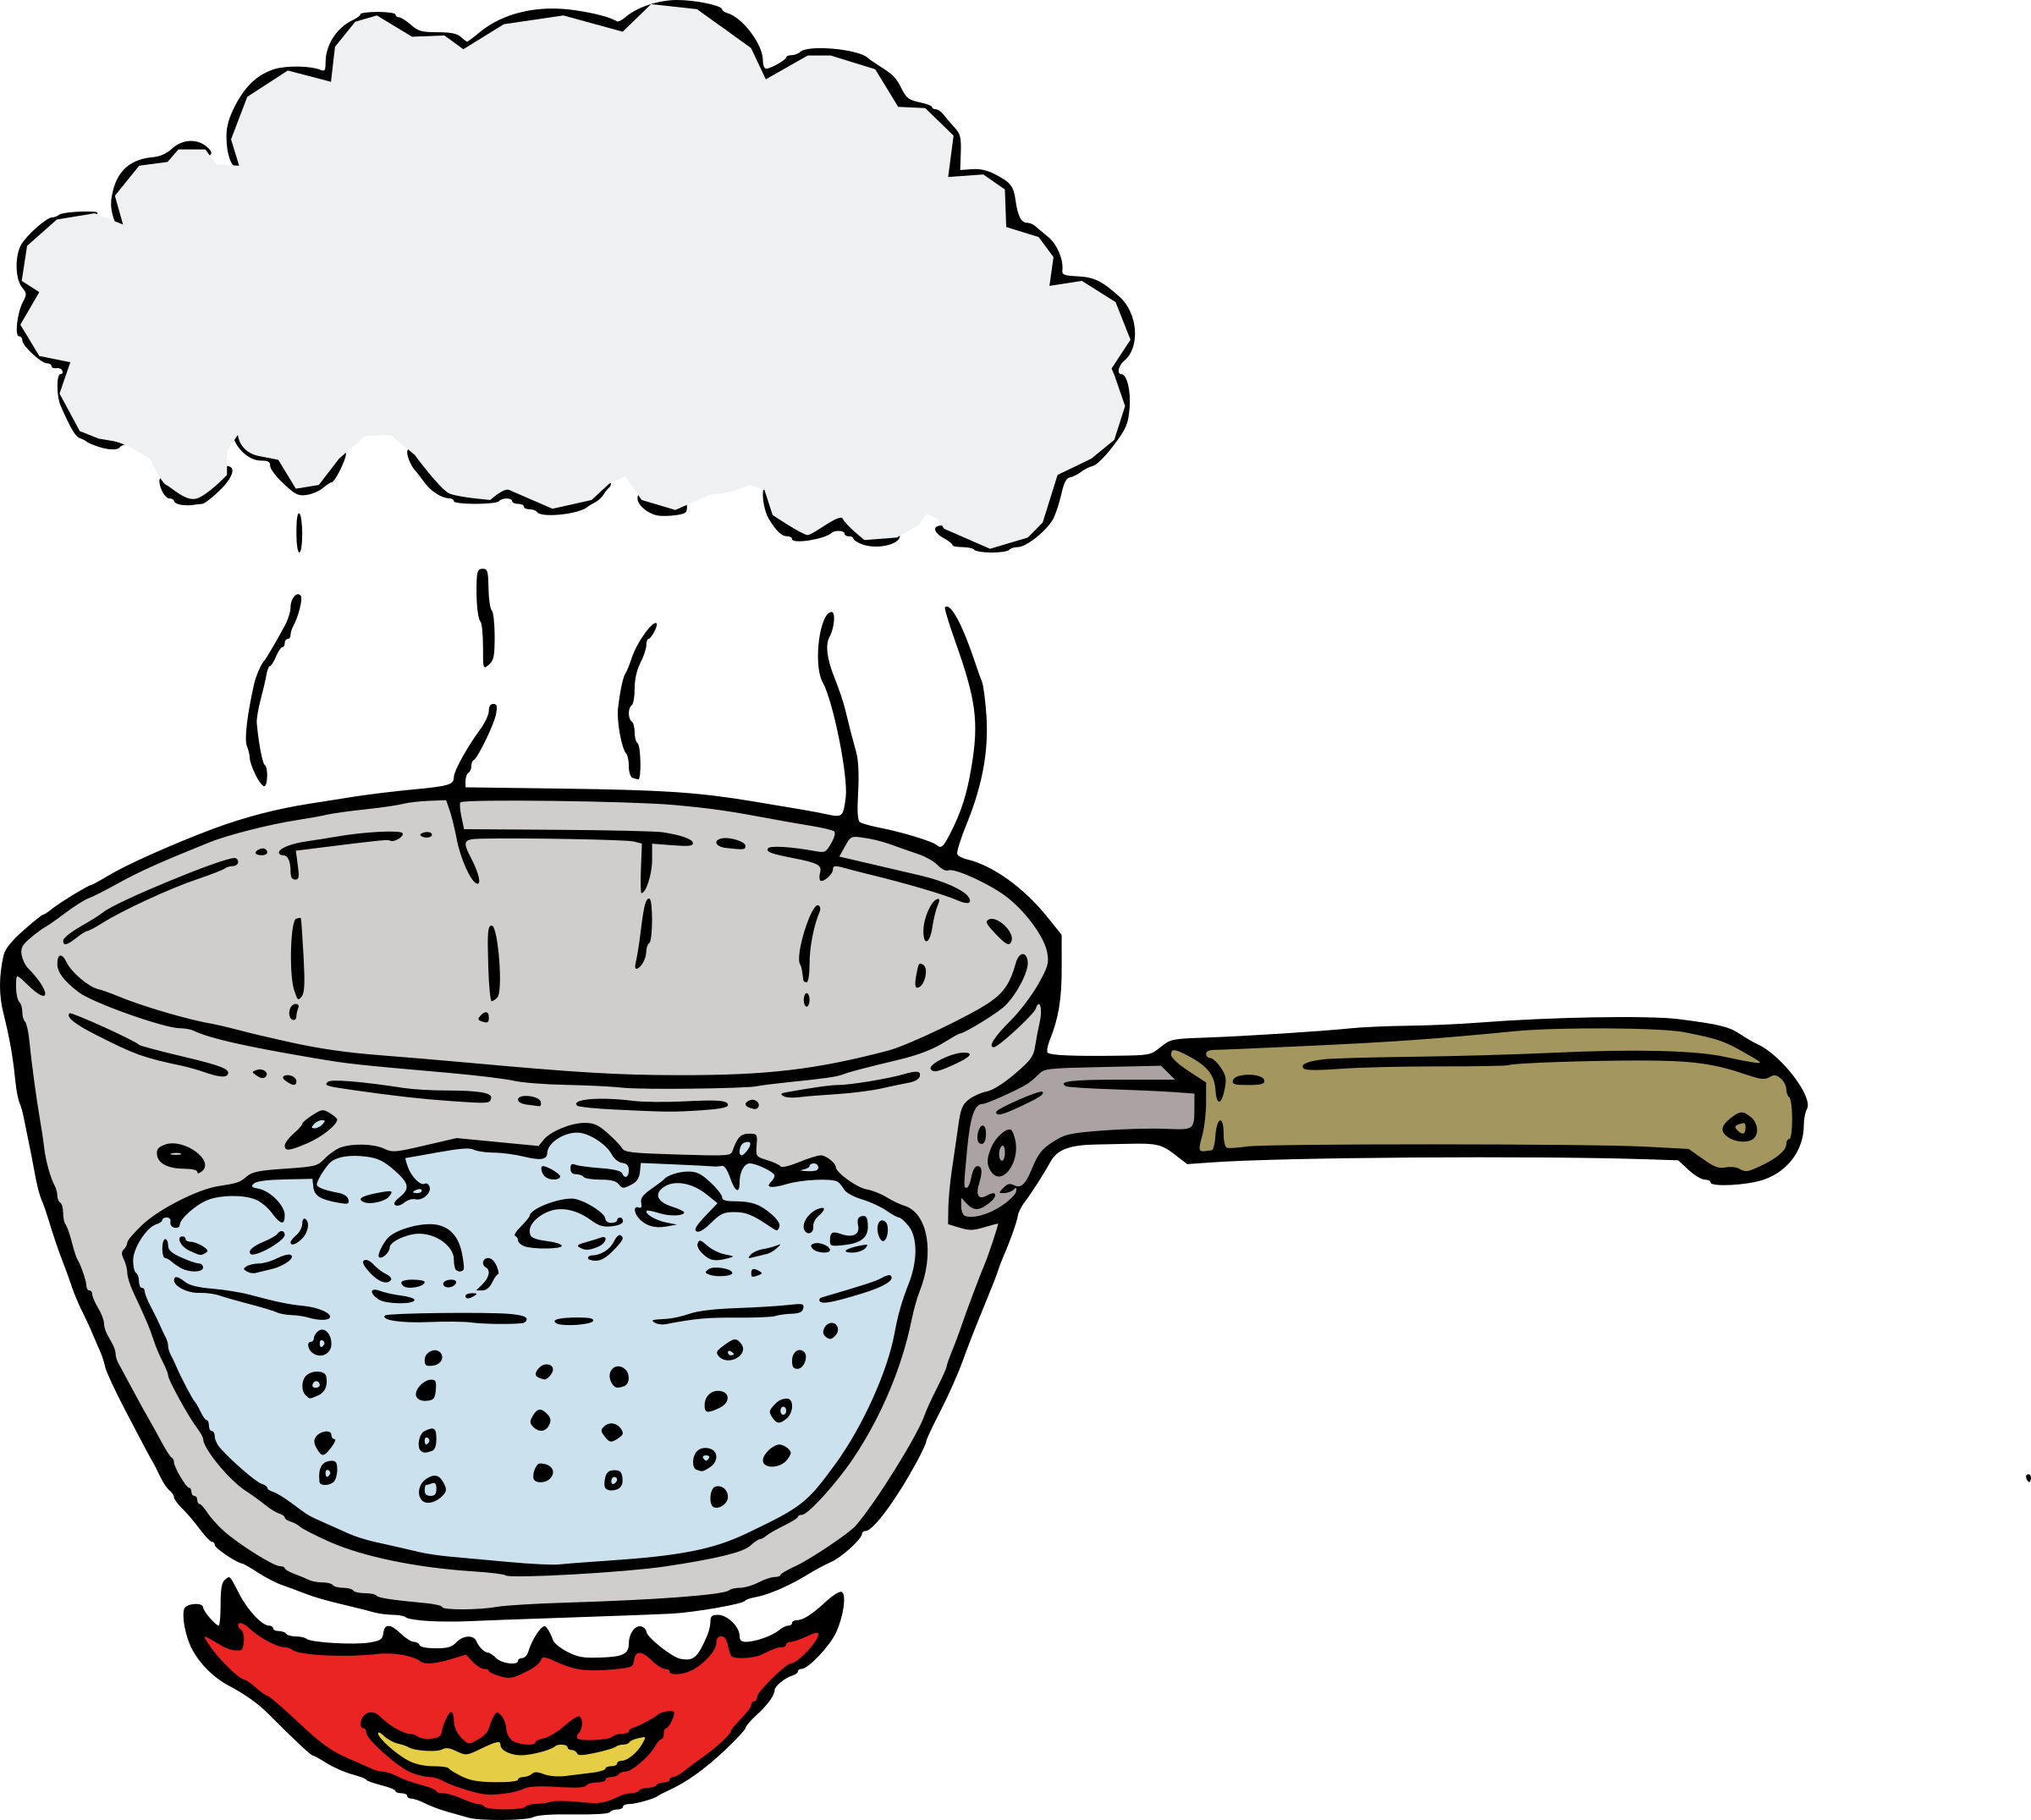 Free To Use Public Domain Kitchen Clip Art - Boiling Water Clip Art.